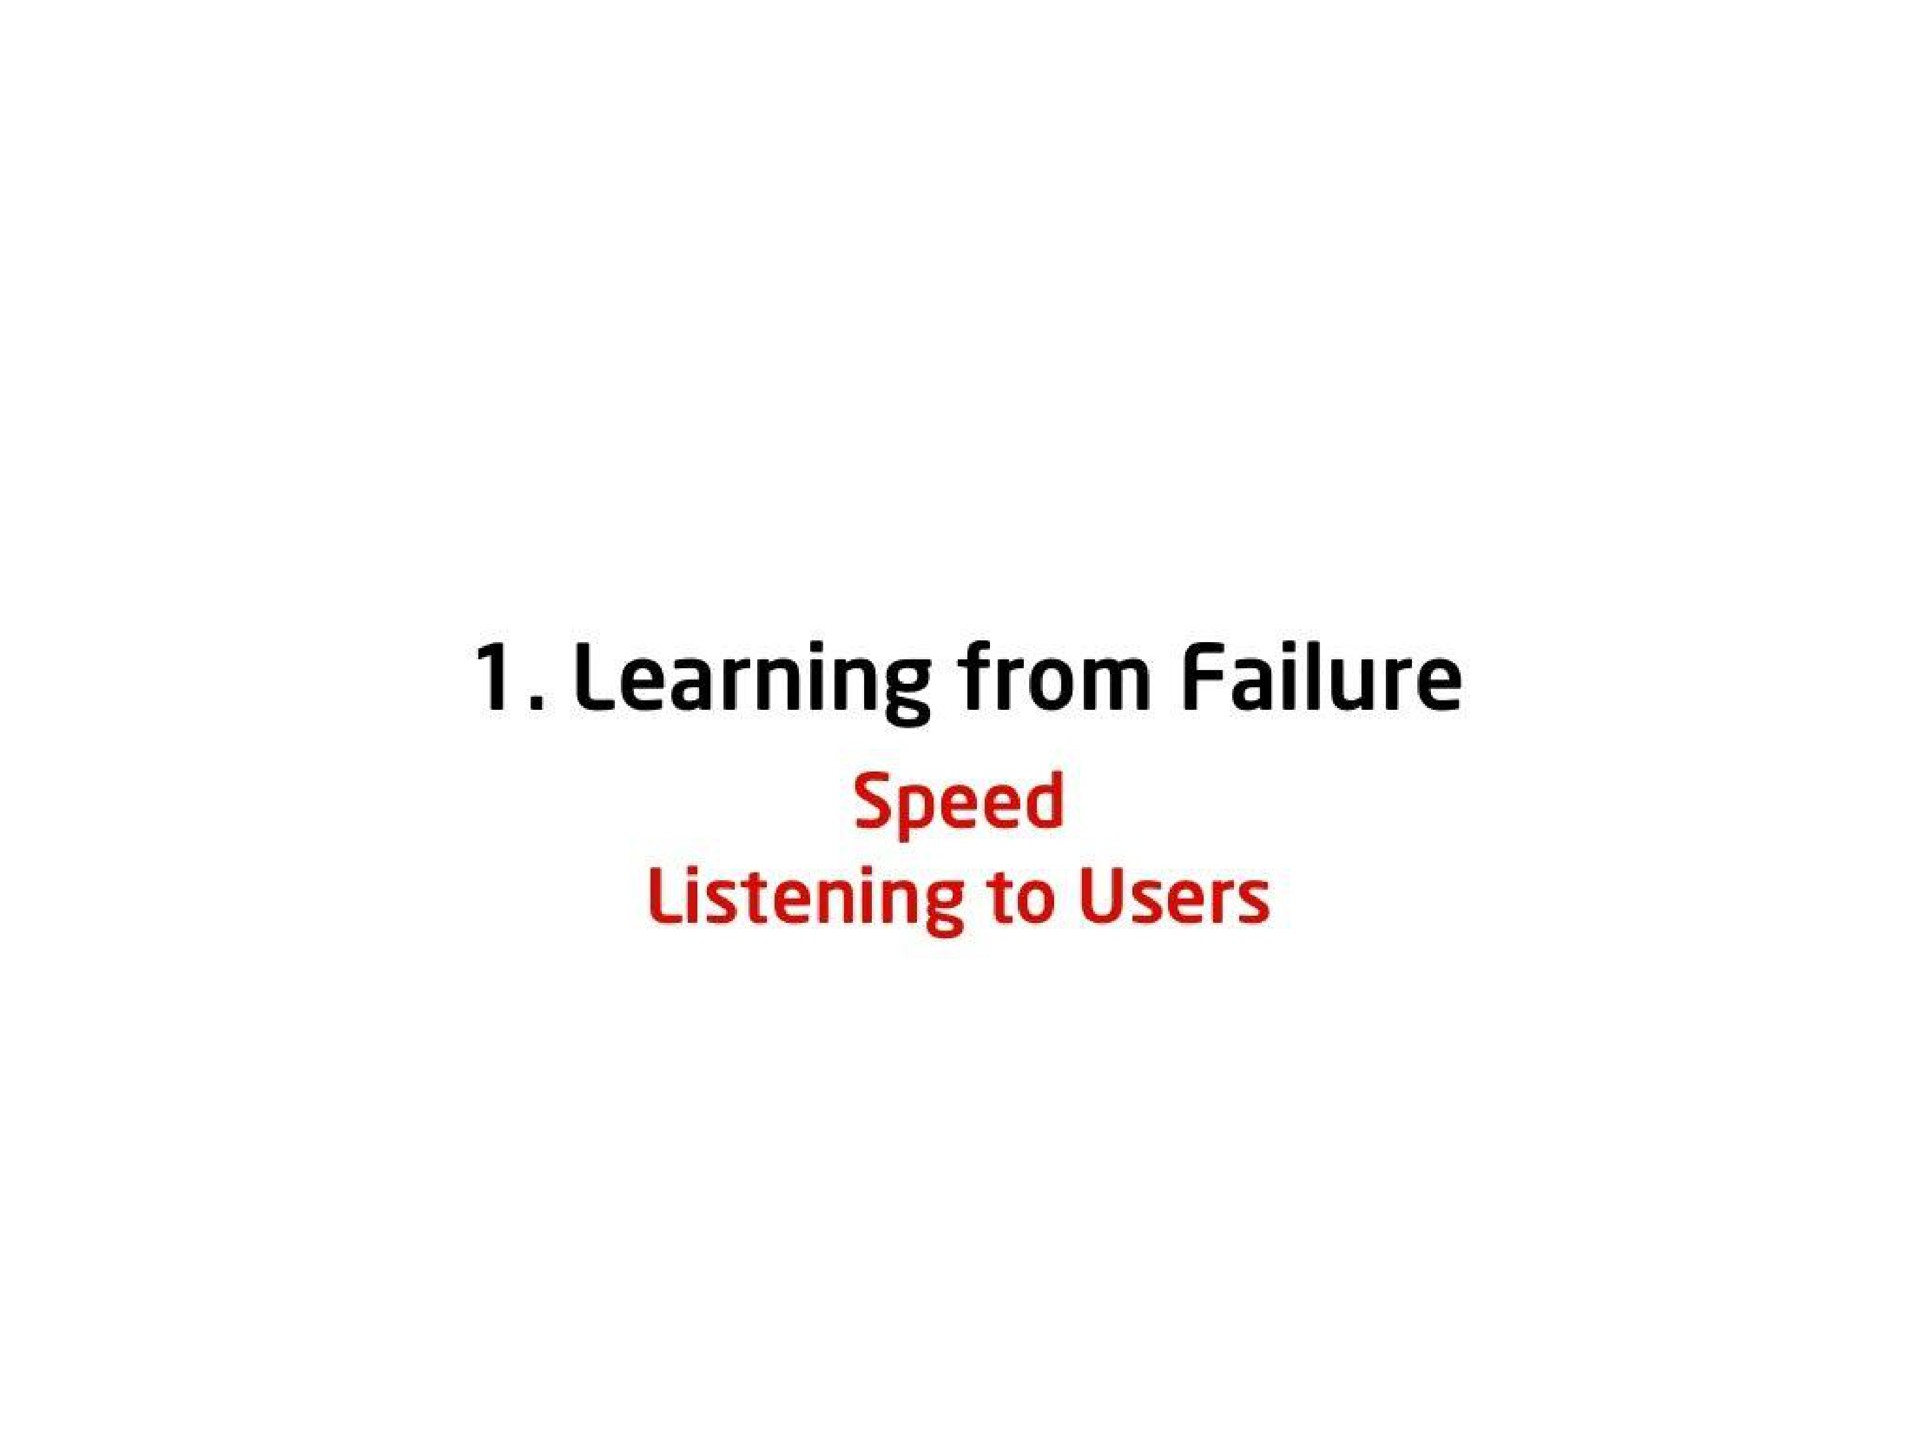 learning from failure speed listening to users | Kakao